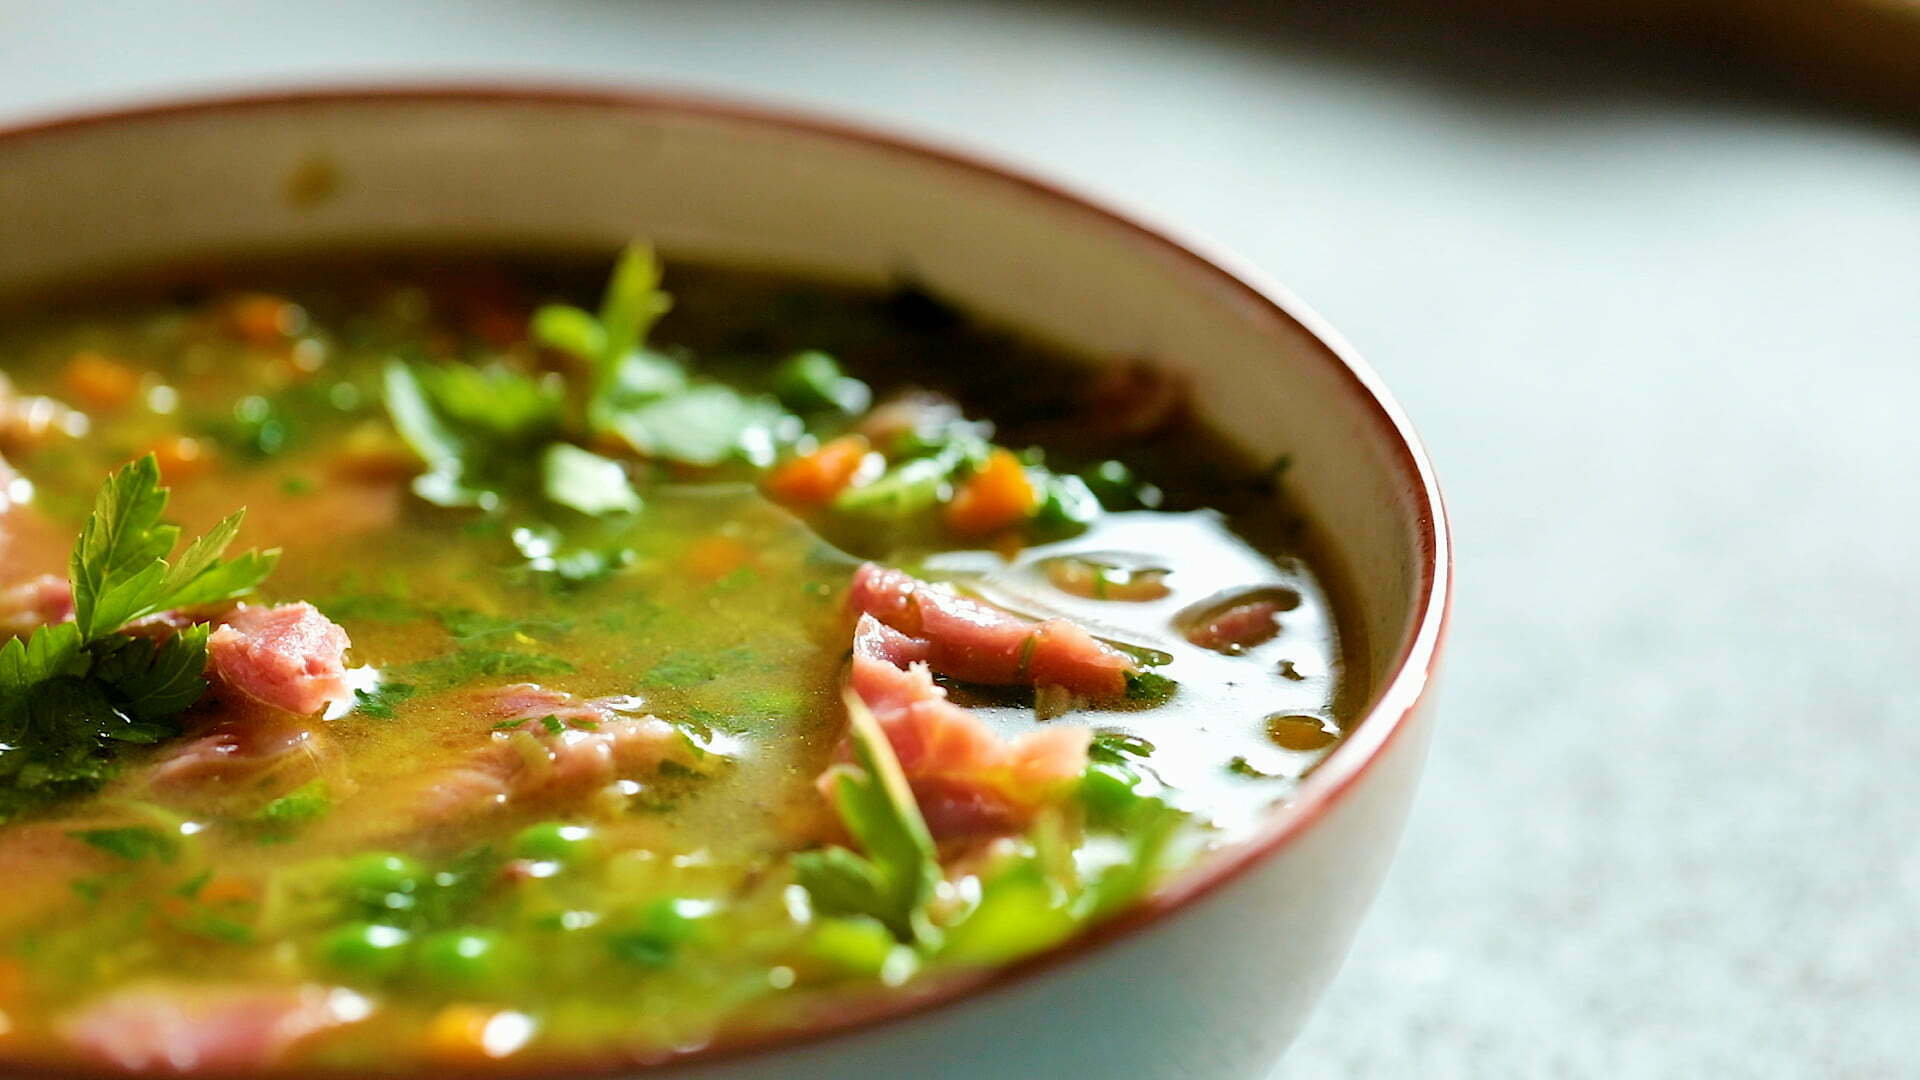 Best Pea and Ham Soup Recipe 2022 – 3 Nutritional Benefits